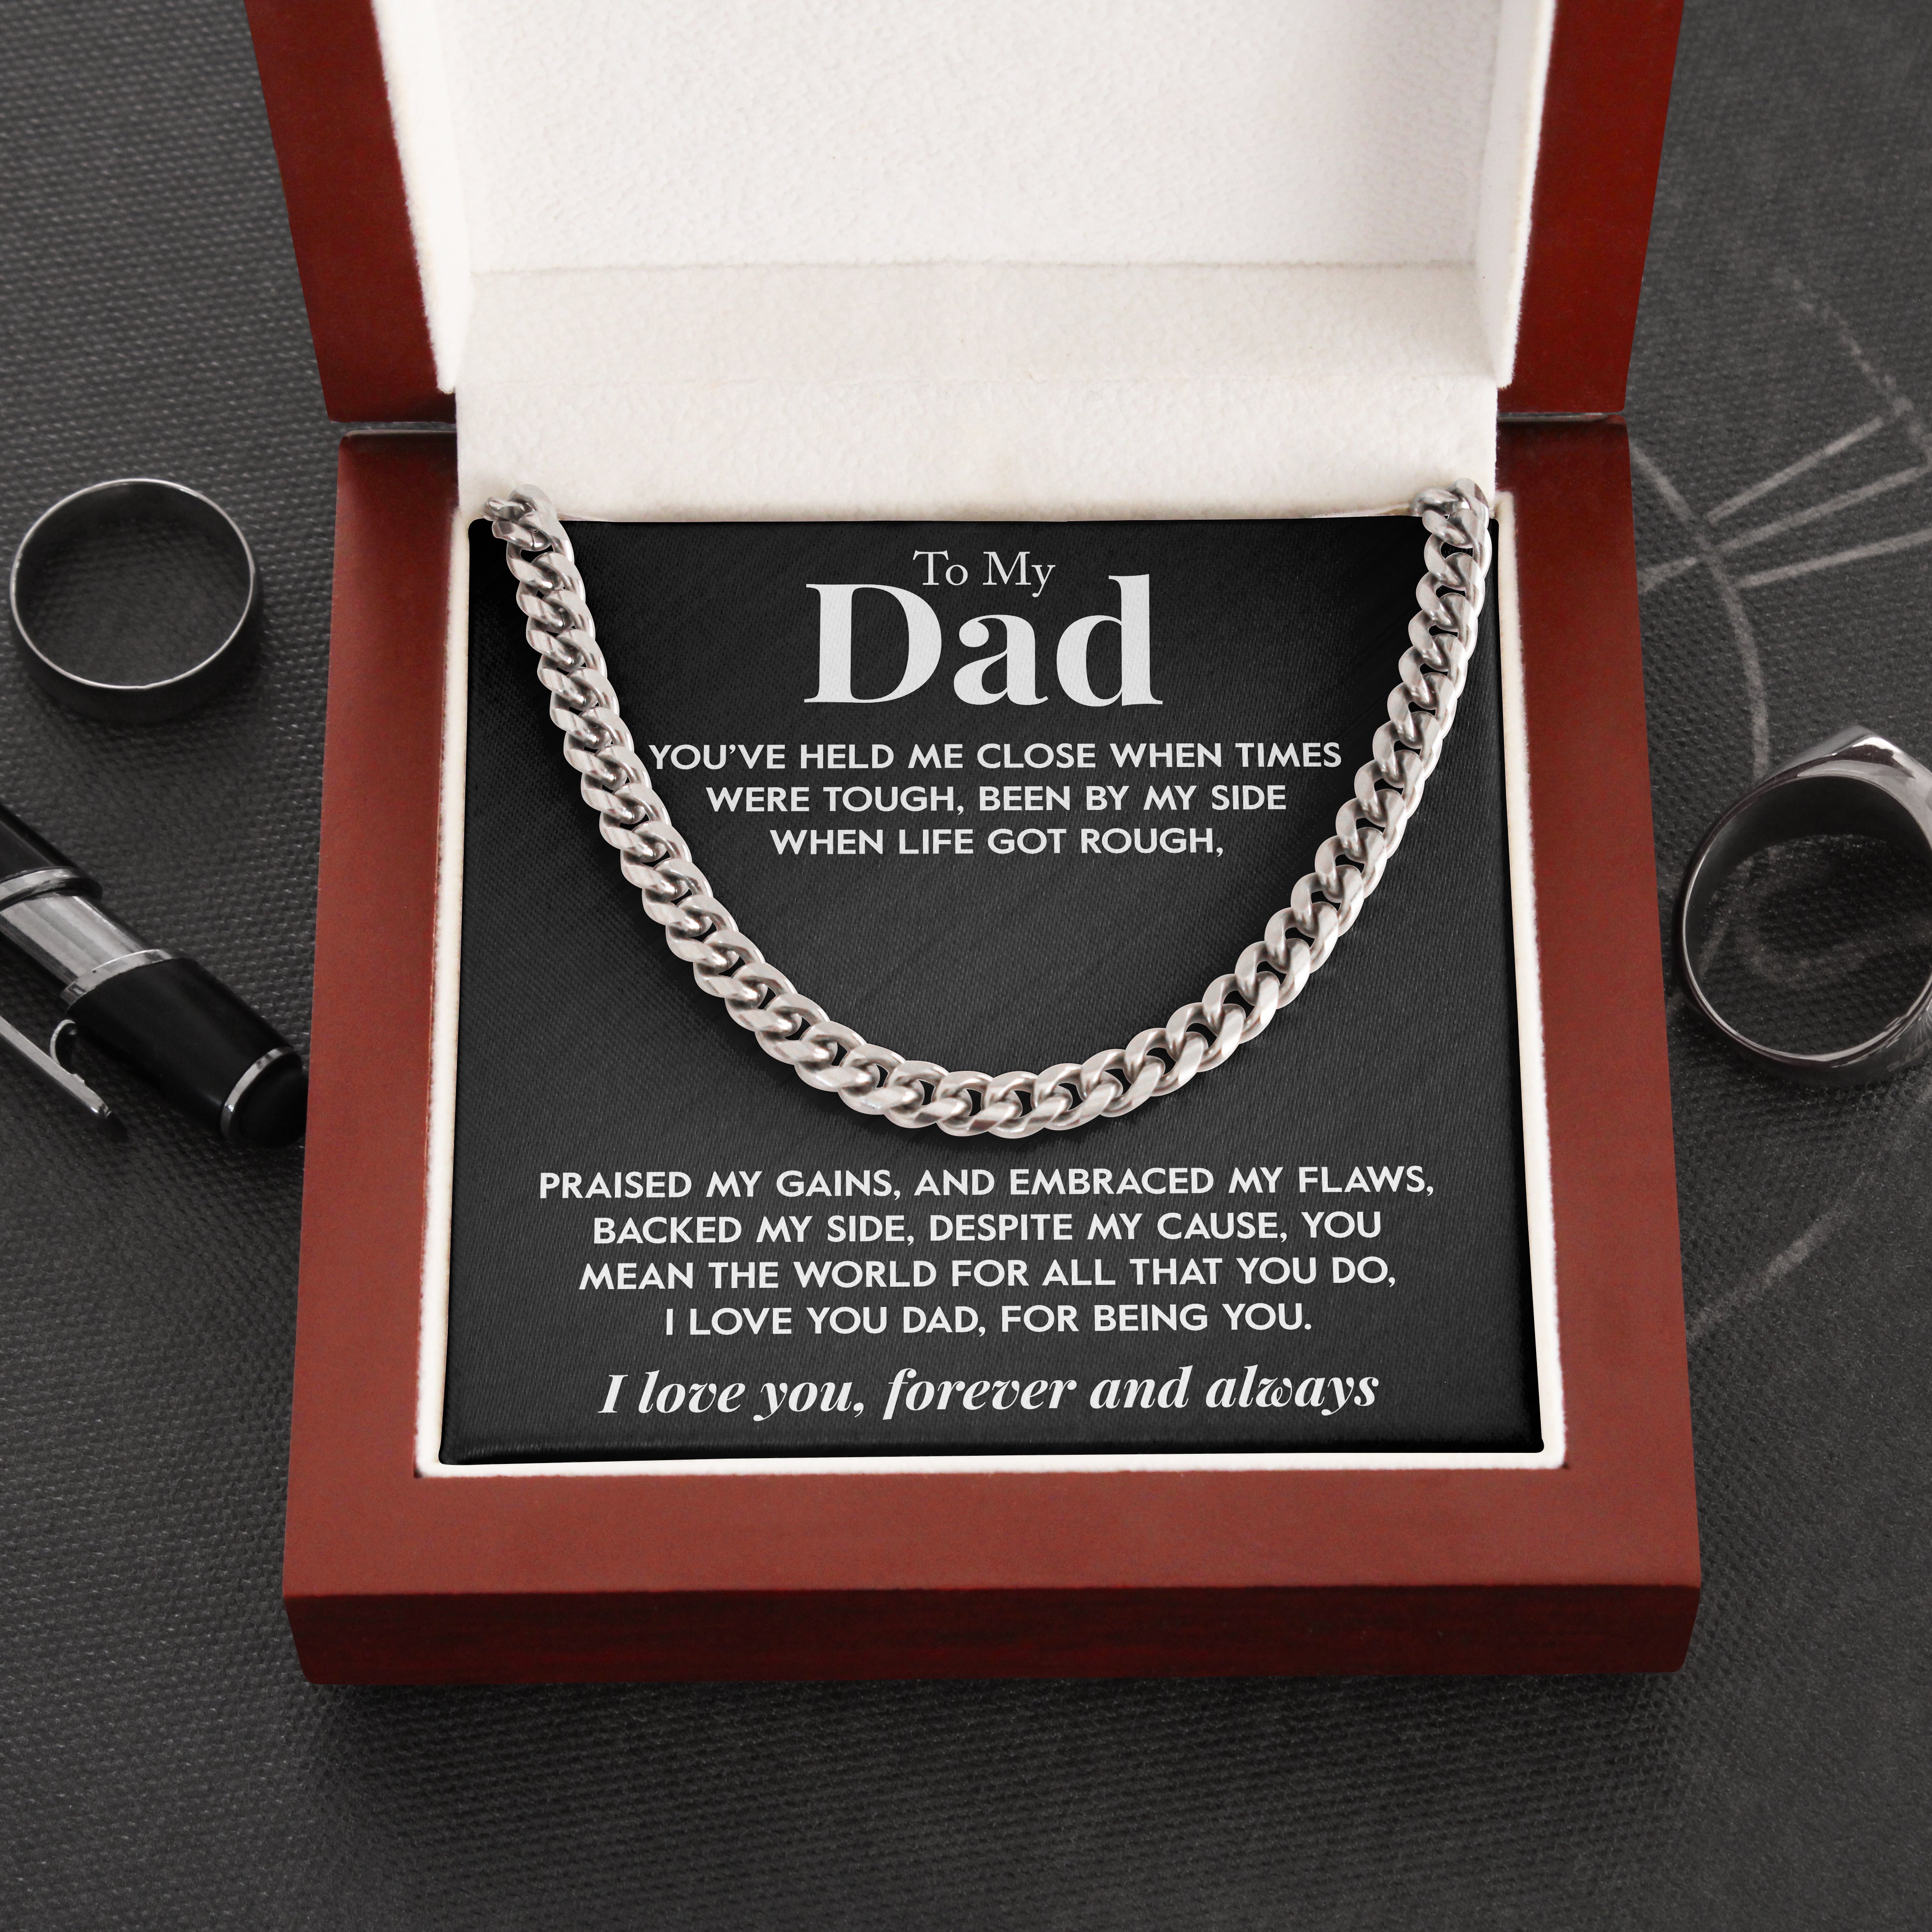 To My Dad | "Mean the World" | Cuban Chain Link